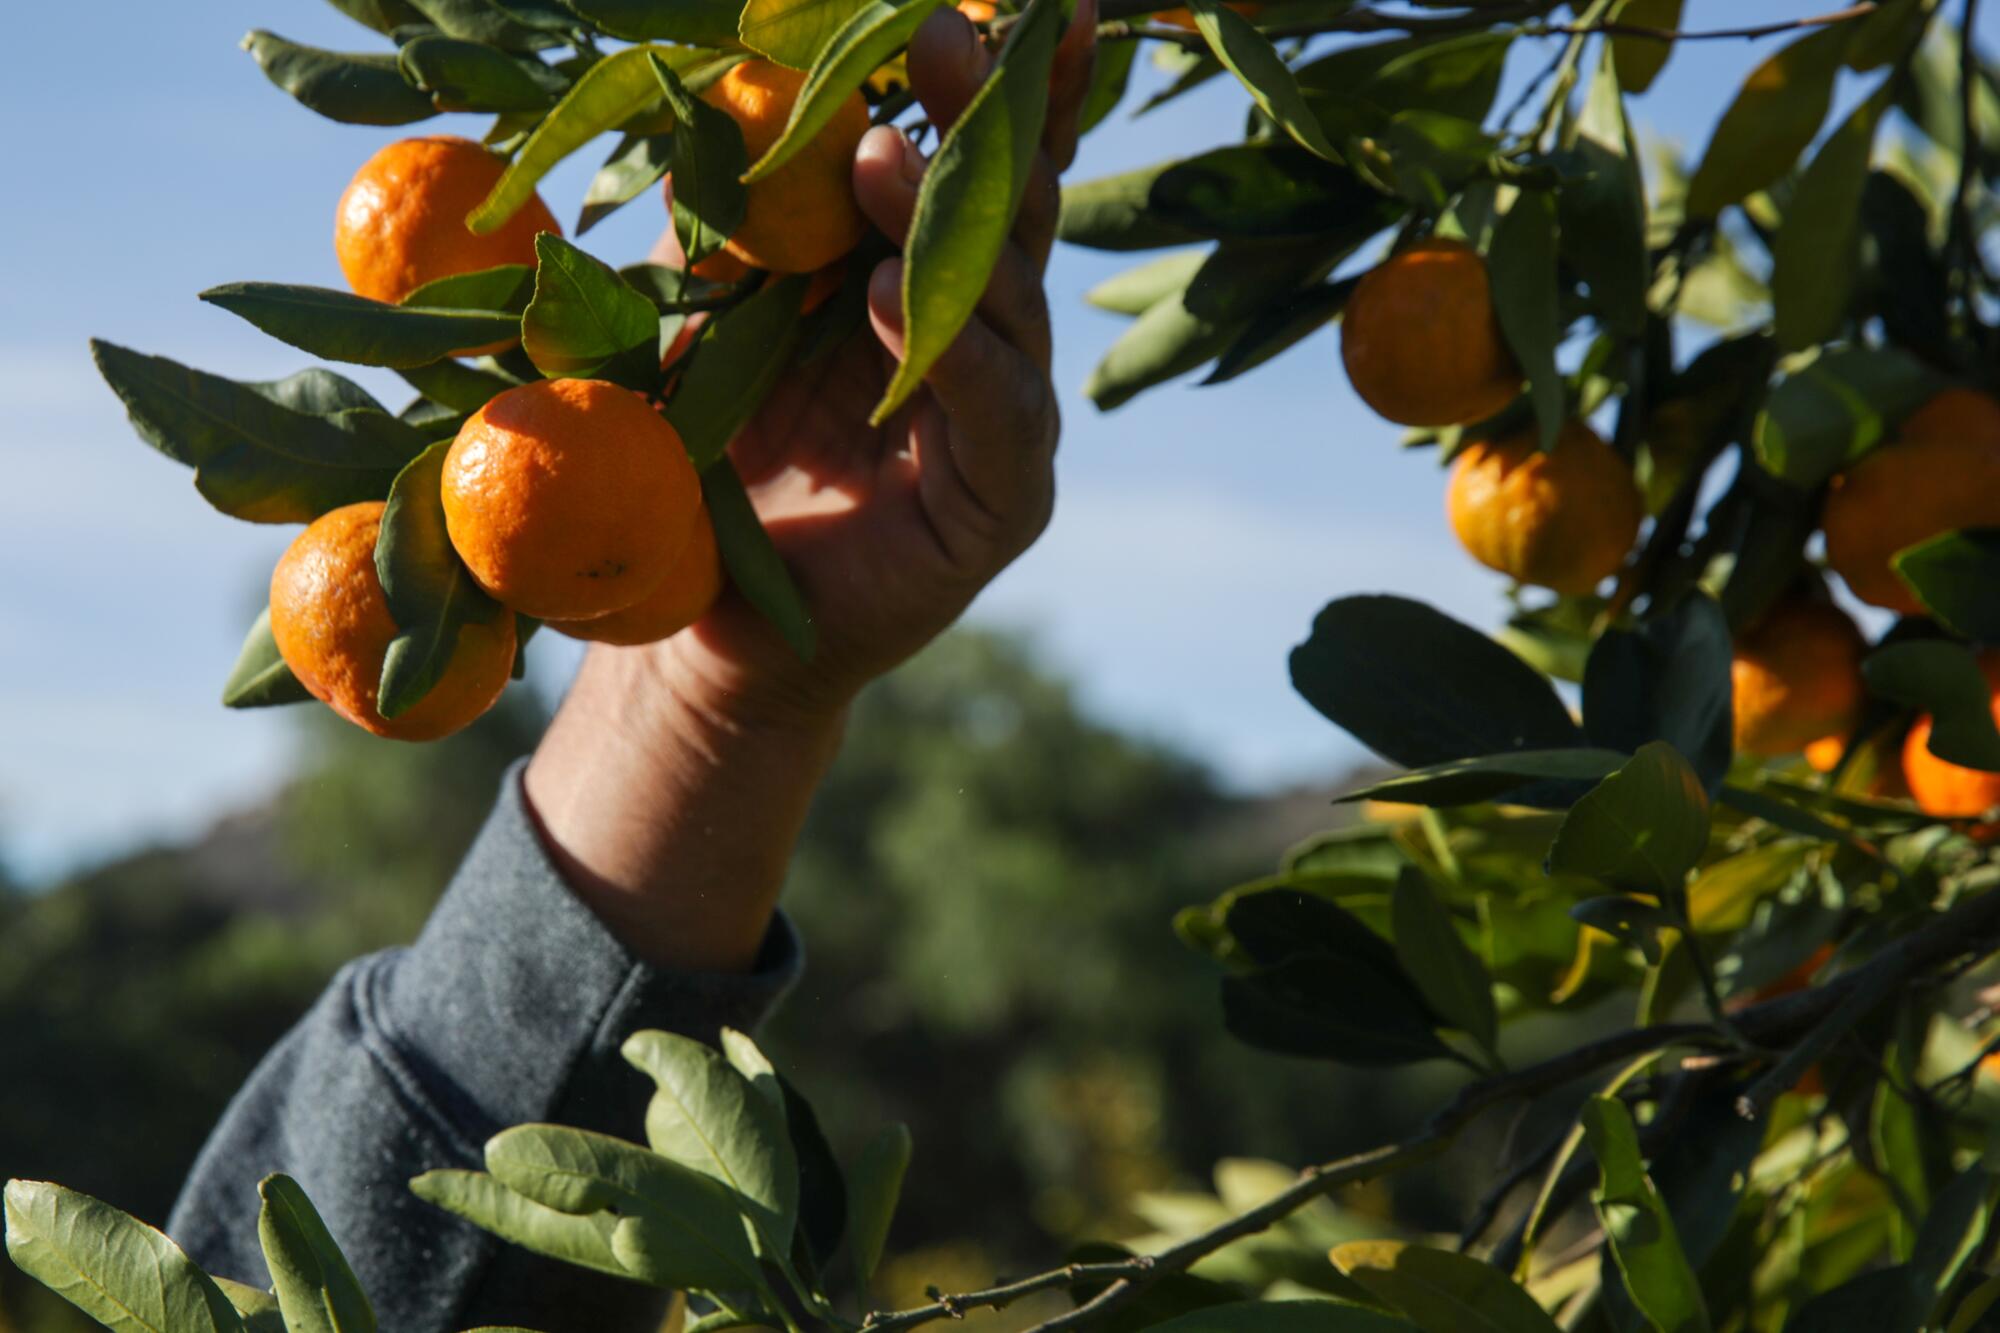 A hand reaches up to pick orange citrus fruit from a tree.